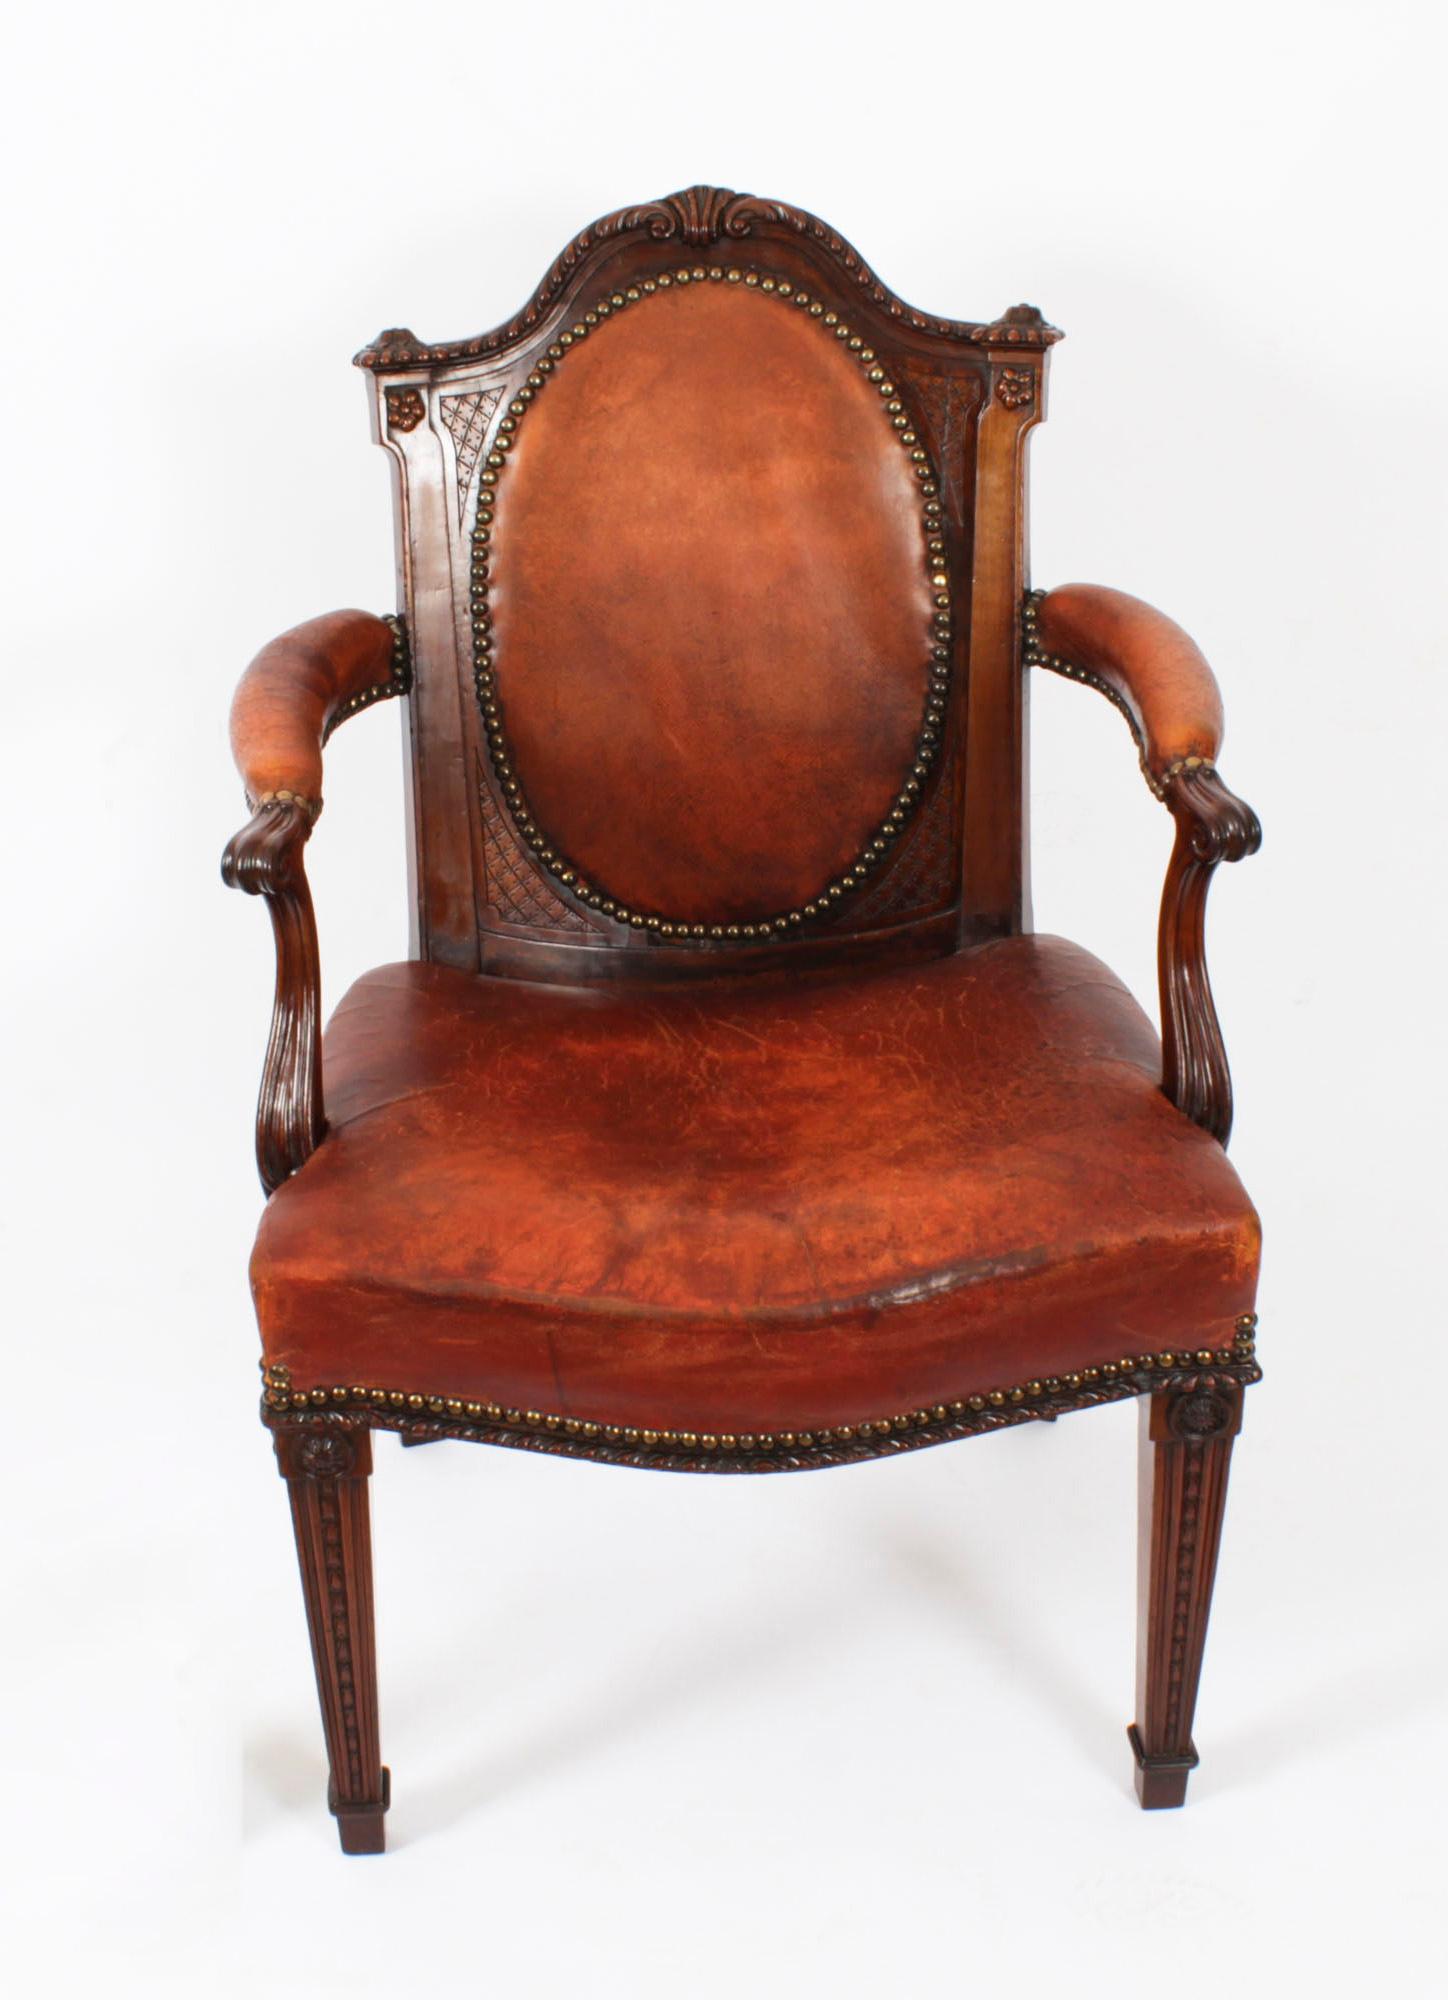 This is a fantastic antique Victorian Mahogany desk armchair, circa 1860 in date.

Expertly made out of superbly carved mahogany, with stuff over seat and an oval padded back that features its sumptuous original caramel leather.

The shaped arms